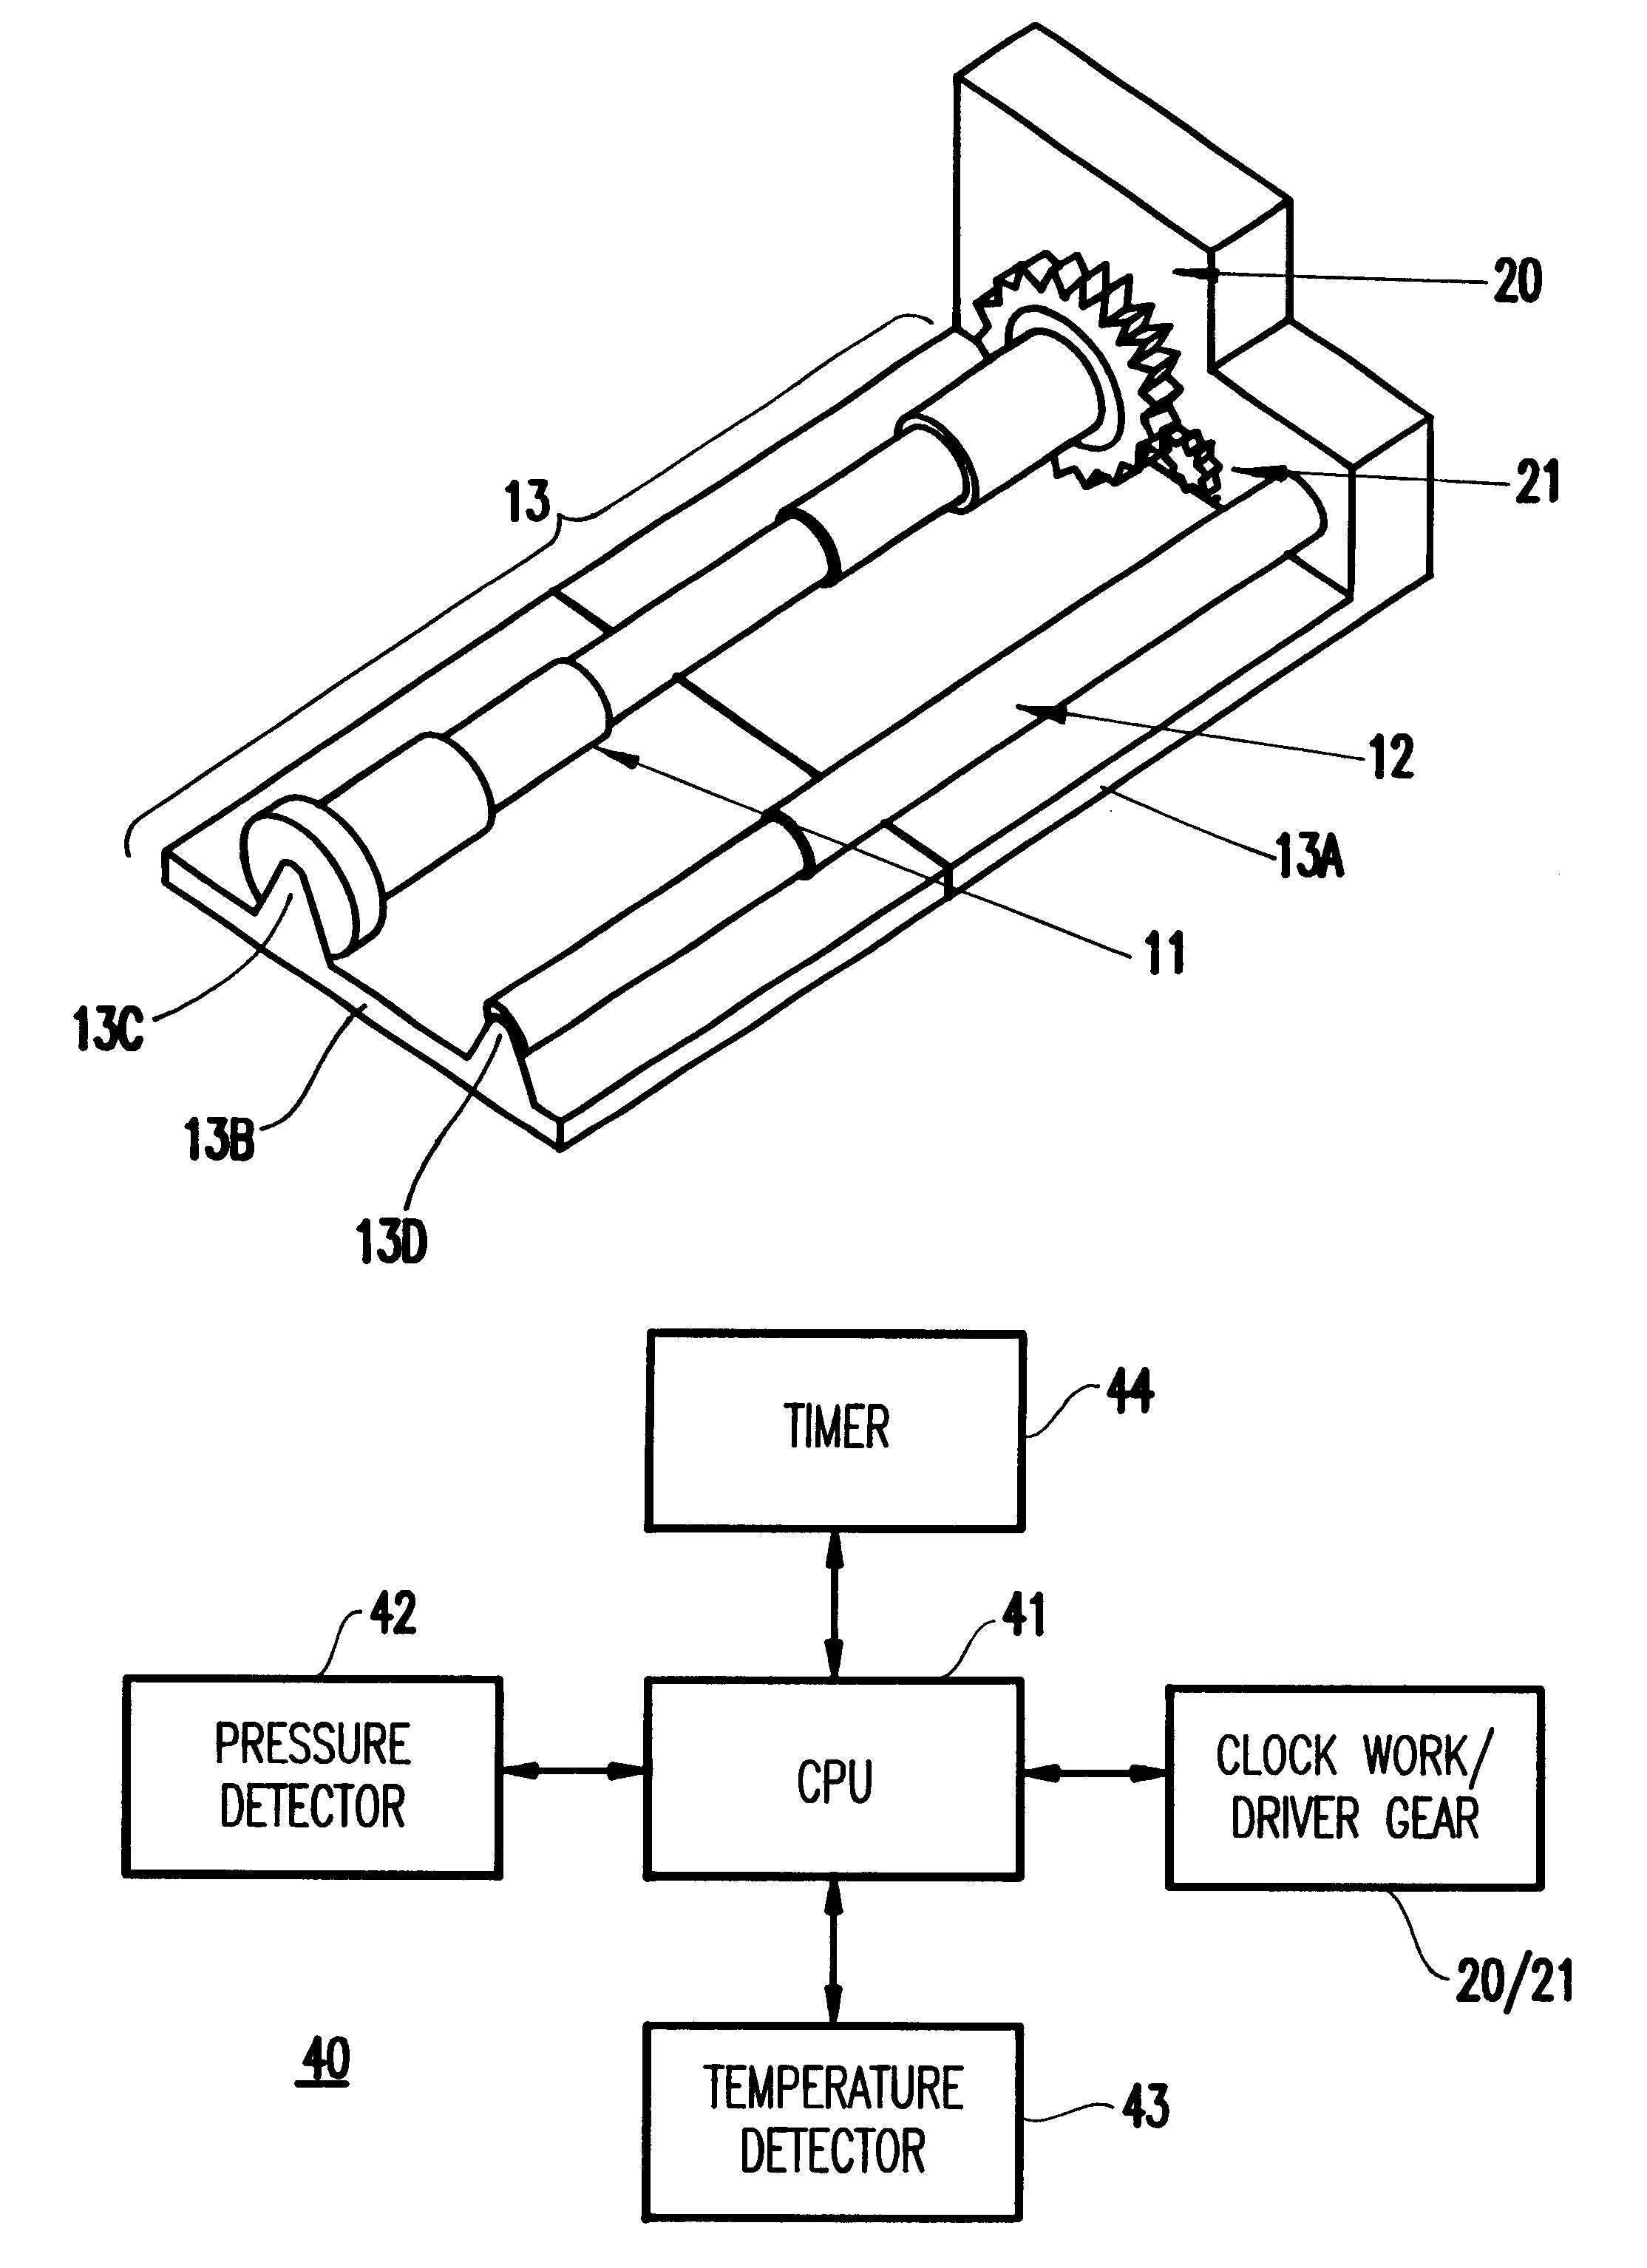 Apparatus for storing containers of mixtures for preventing separation or crystallization thereof